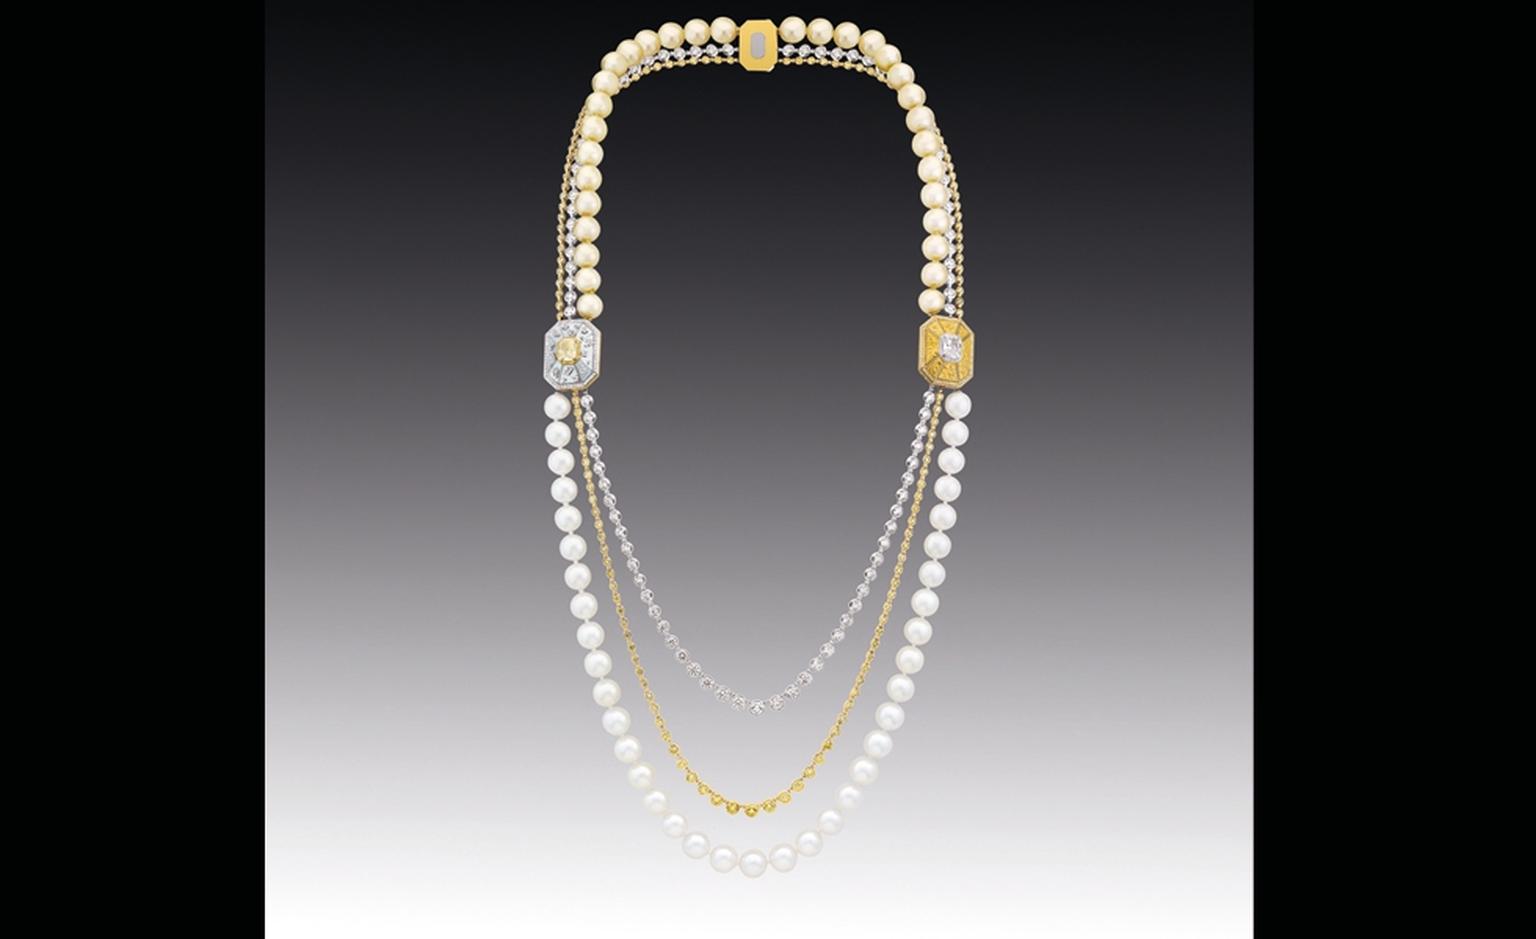 Chanel Contrastes collection: Collier Soleil d'automne. Necklace in white and yellow gold set with yellow and white diamonds with white and gold pearls.